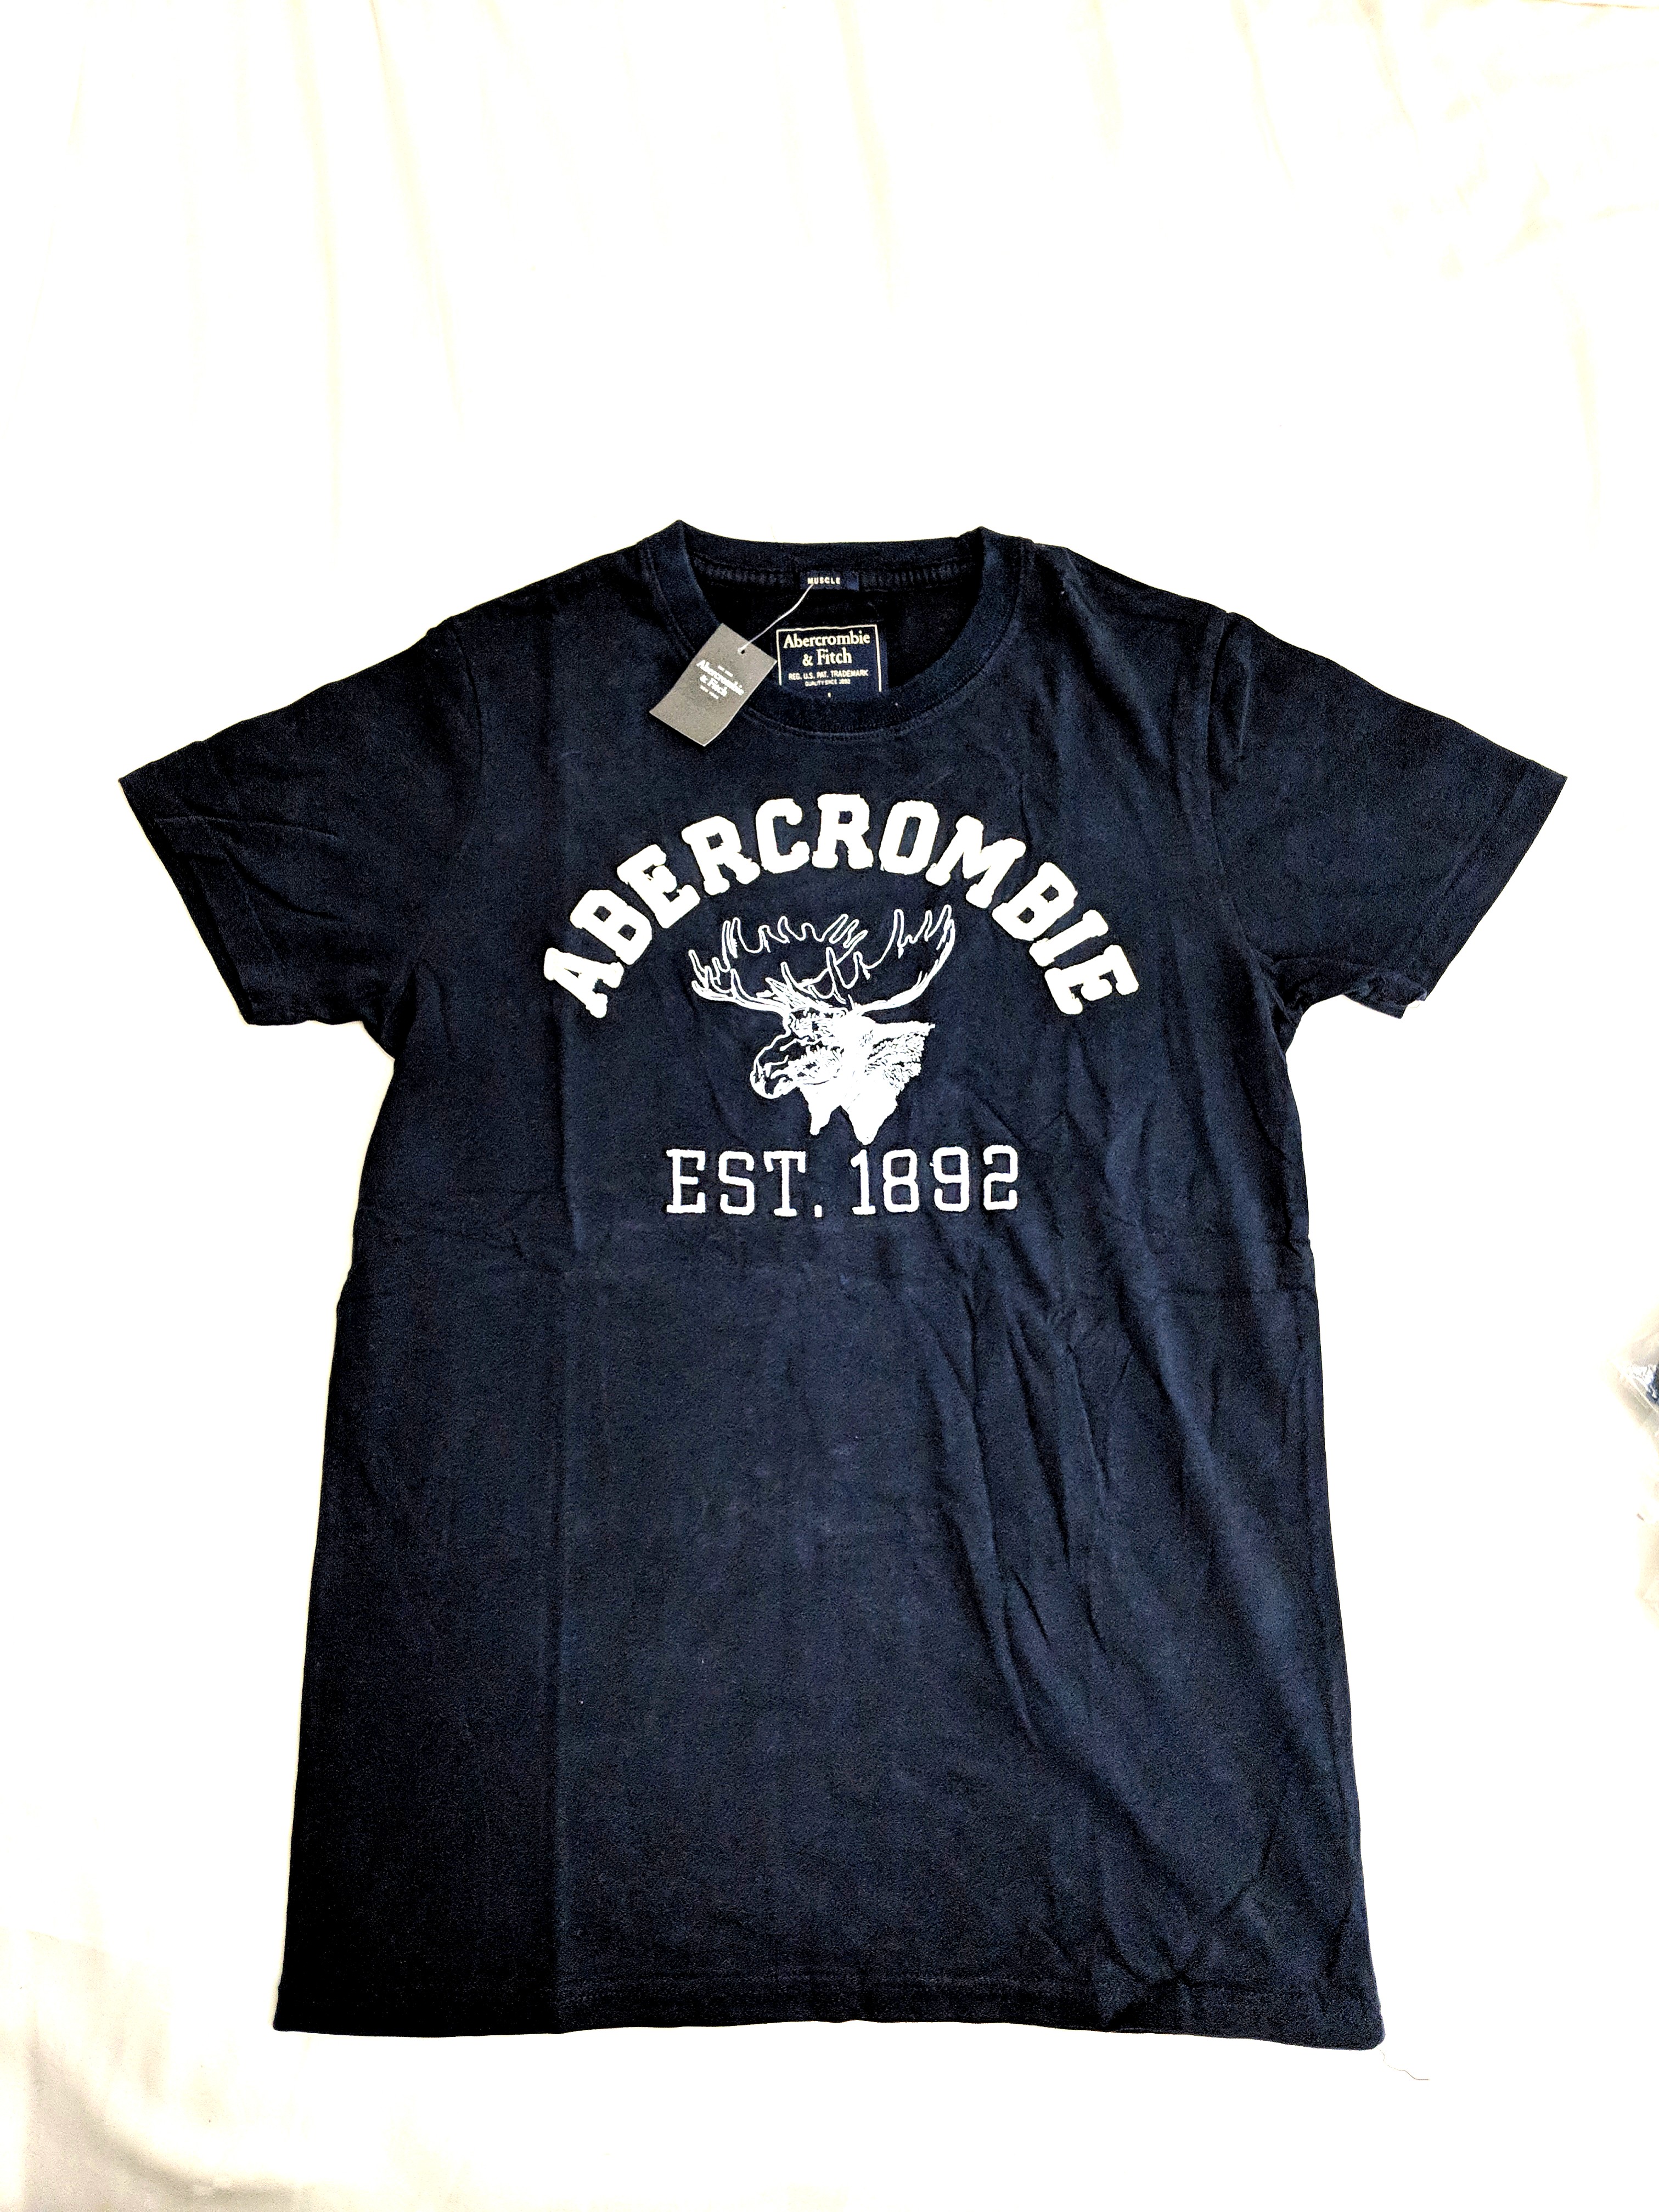 abercrombie and fitch t shirt sale